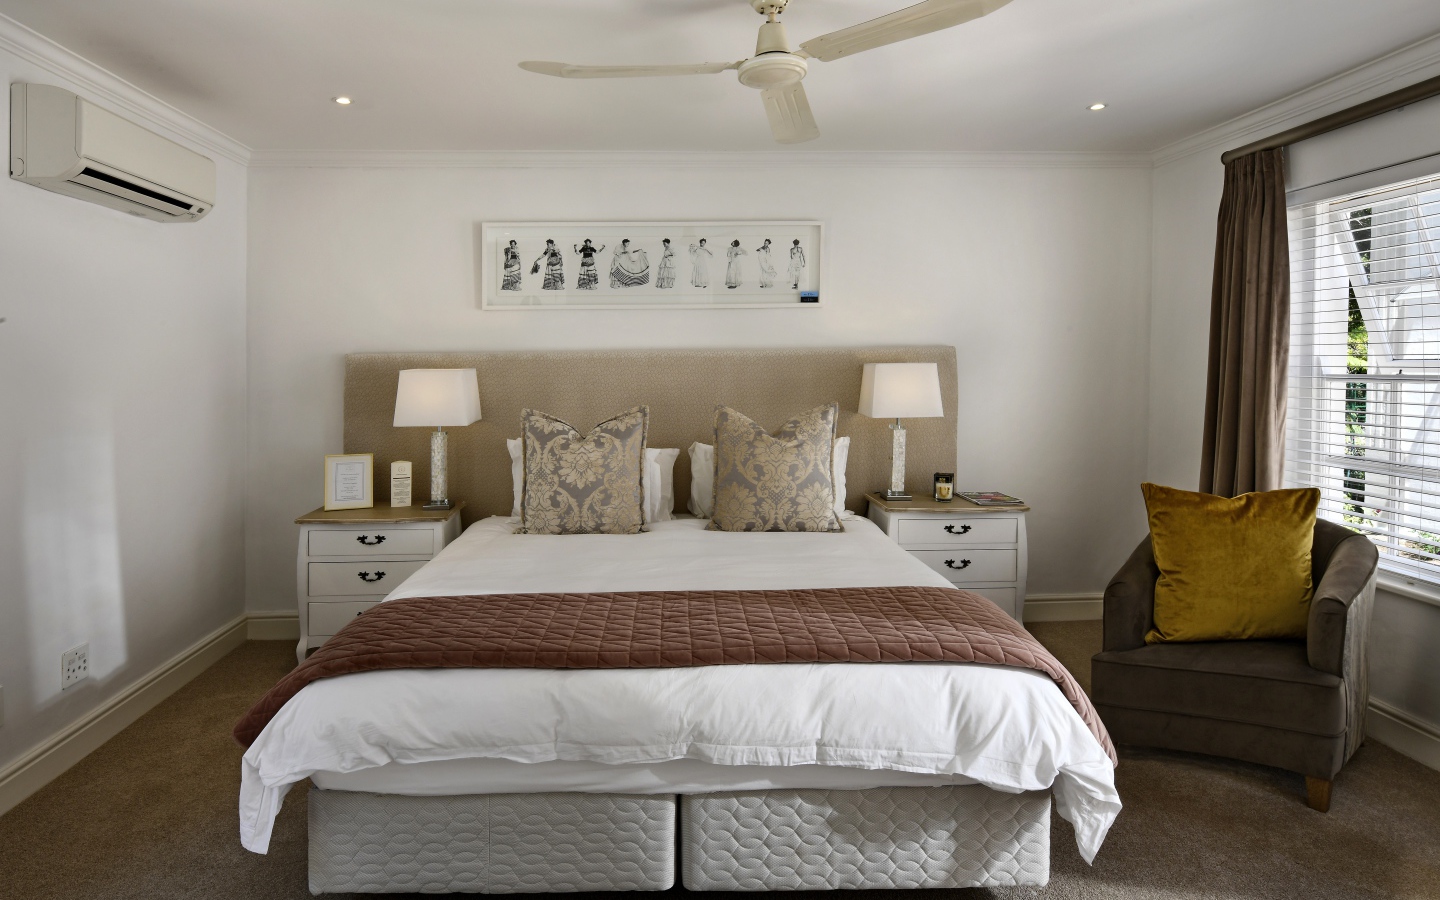 Large bed in the bedroom with fan